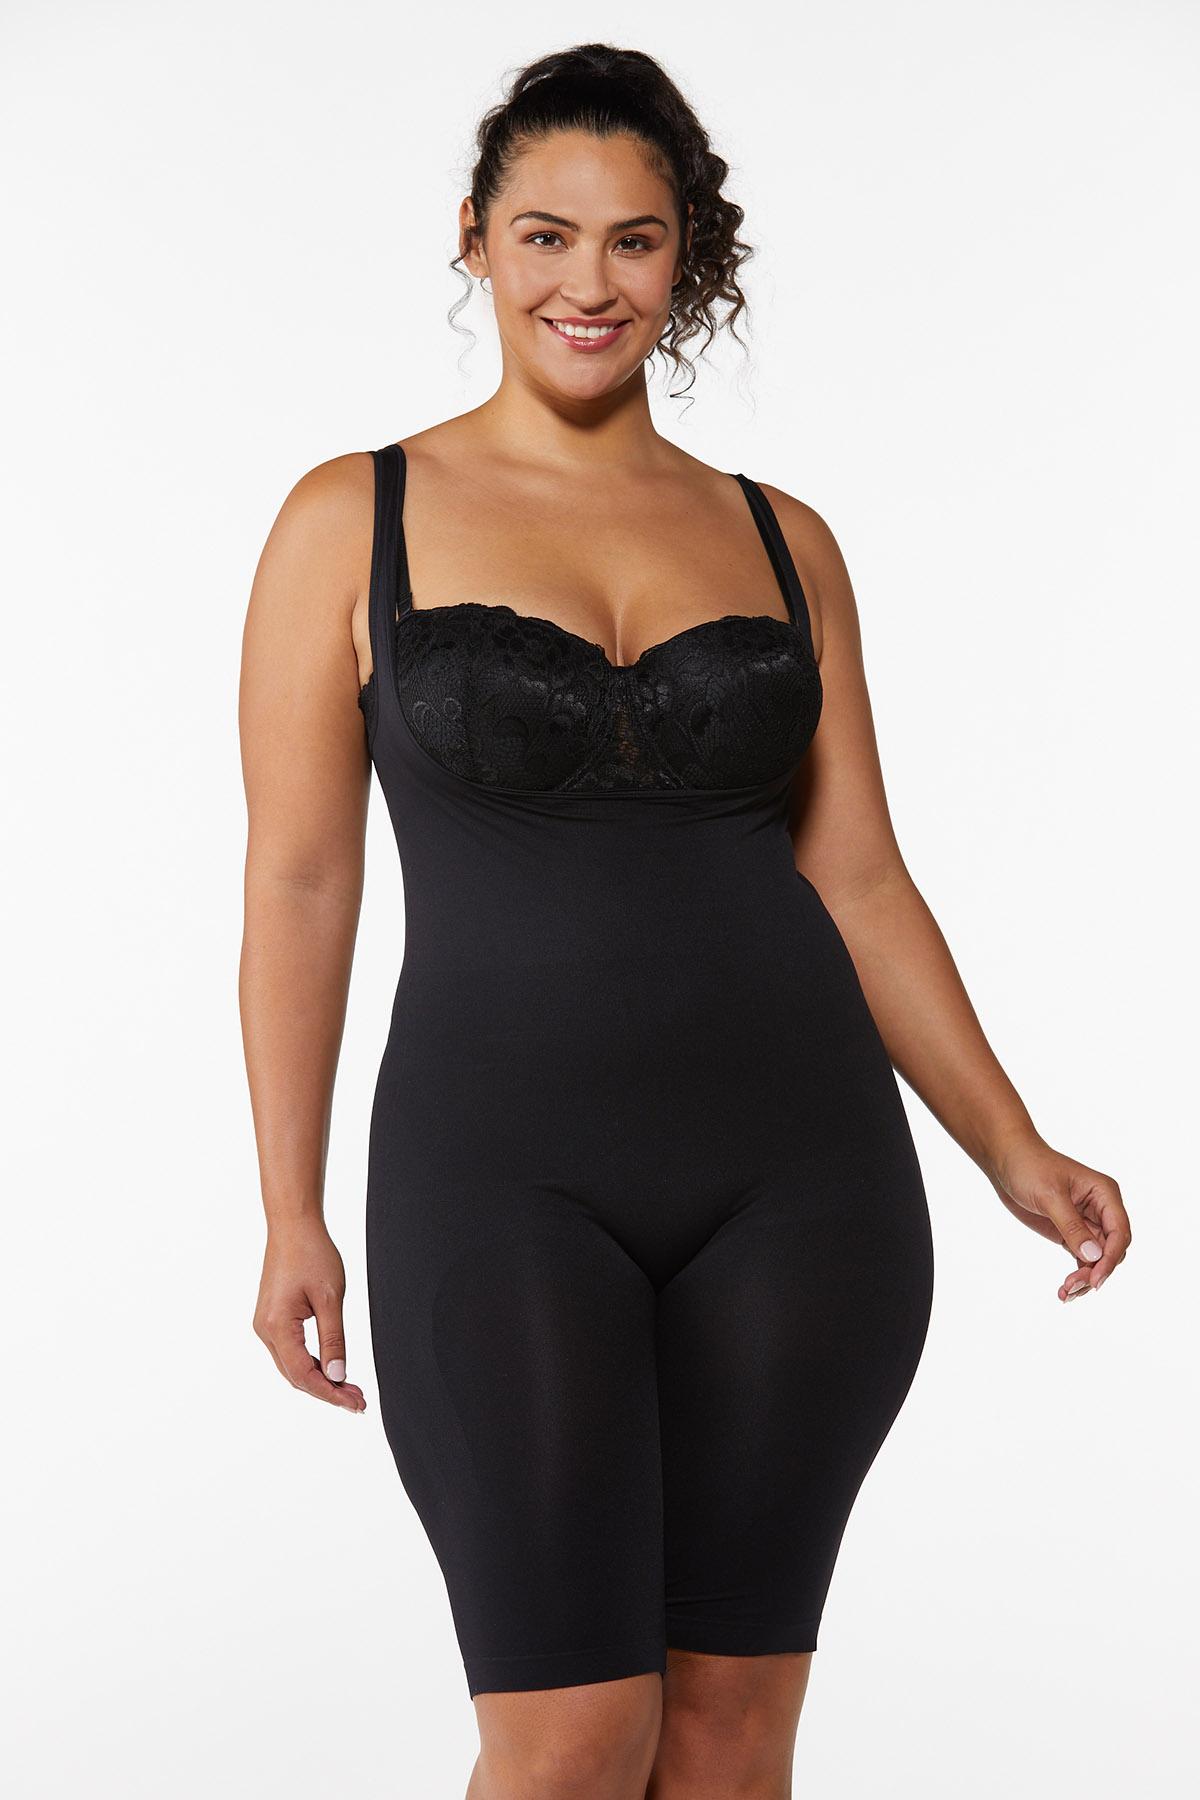 Cato Fashions  Cato Plus Size Seamless Shaping Bodysuit